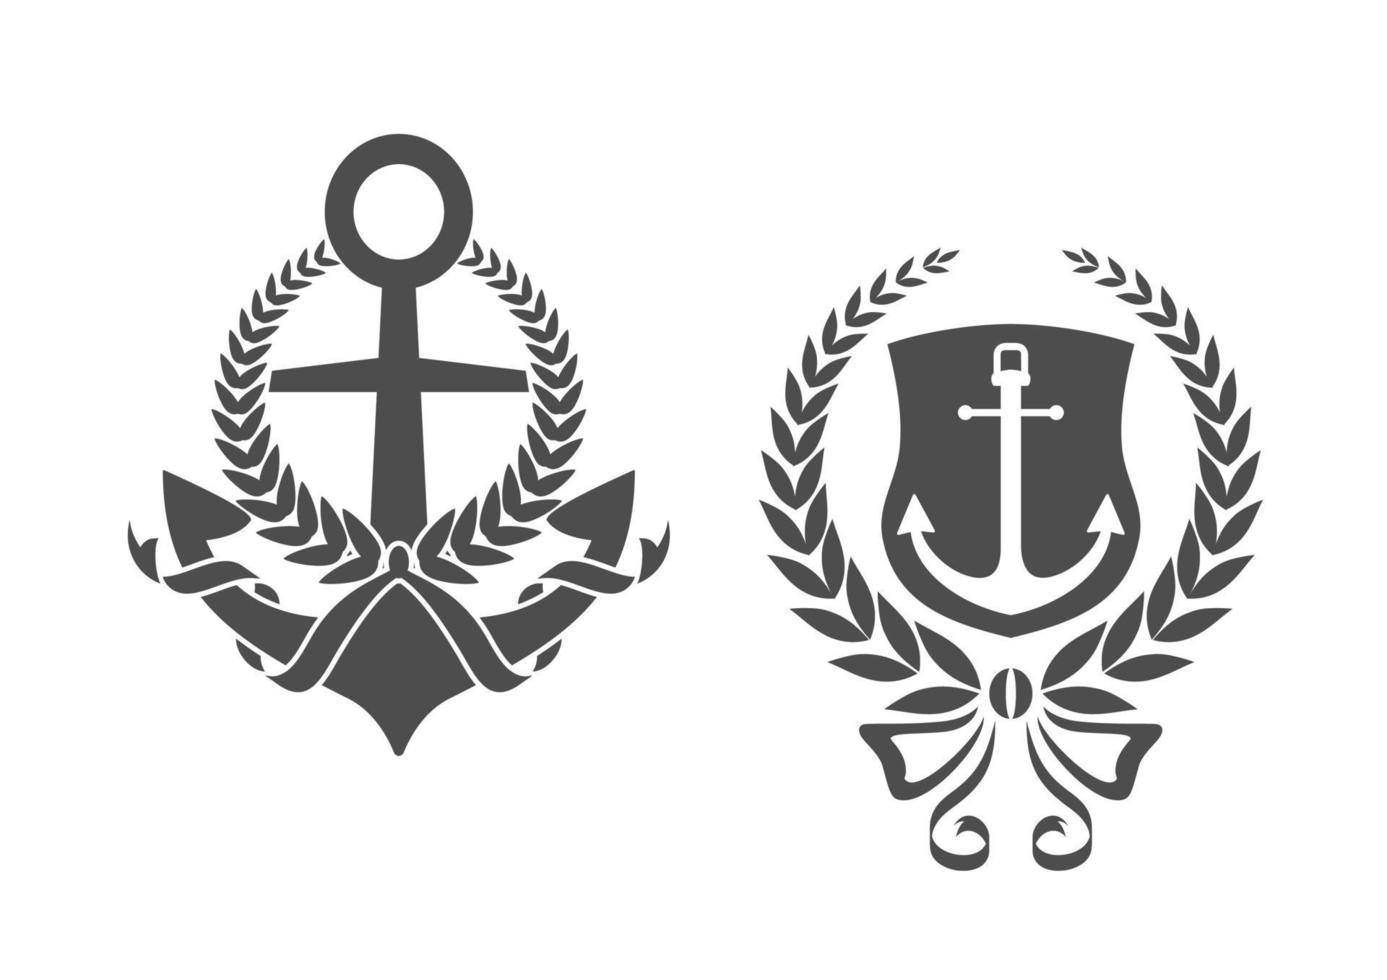 Marine anchors with ribbons and laurel wreathes vector